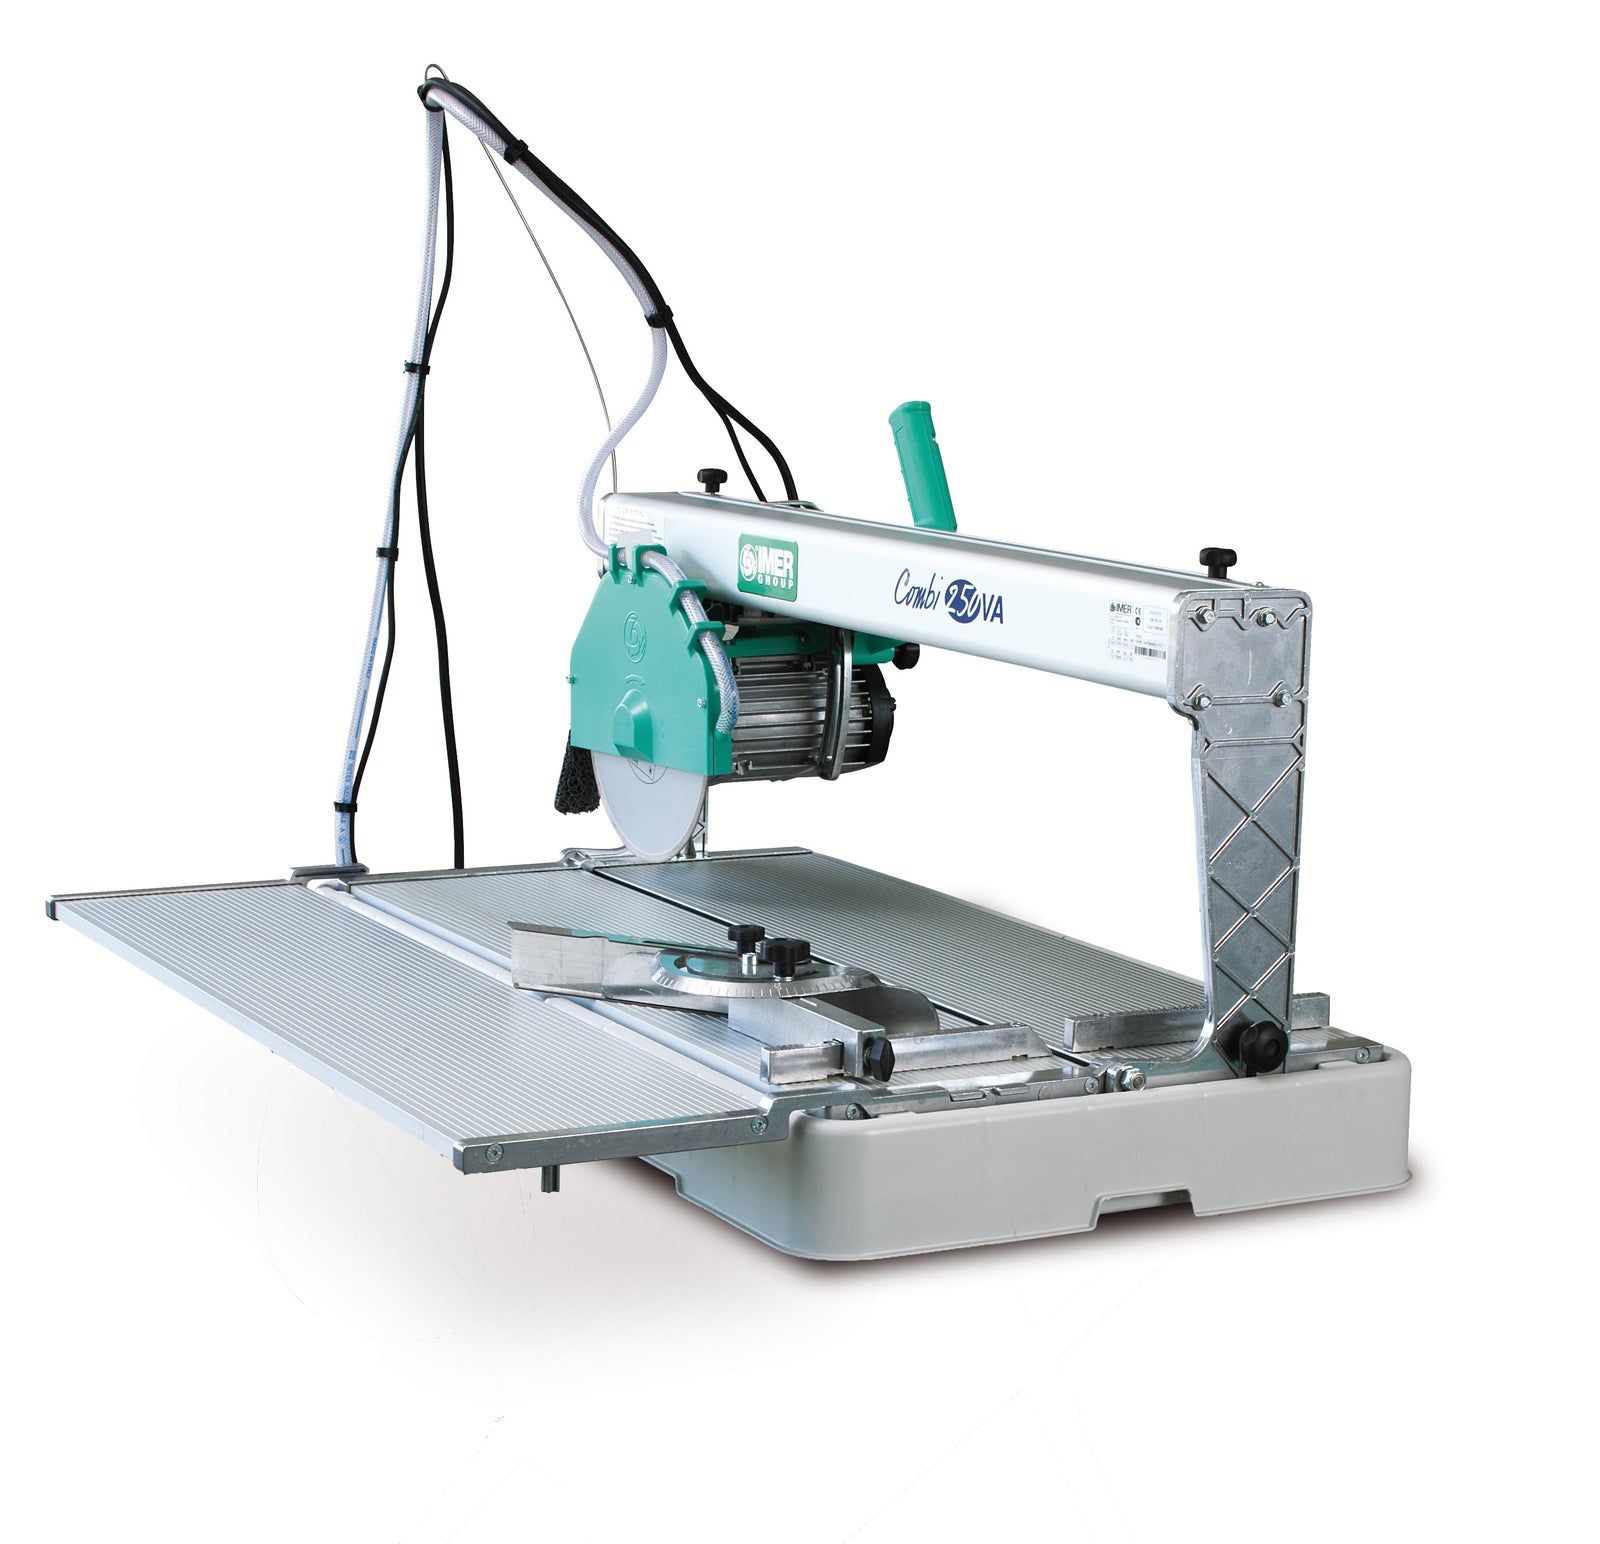 IMER Combi 250 10" precision lightweight tile and stone saw with side table